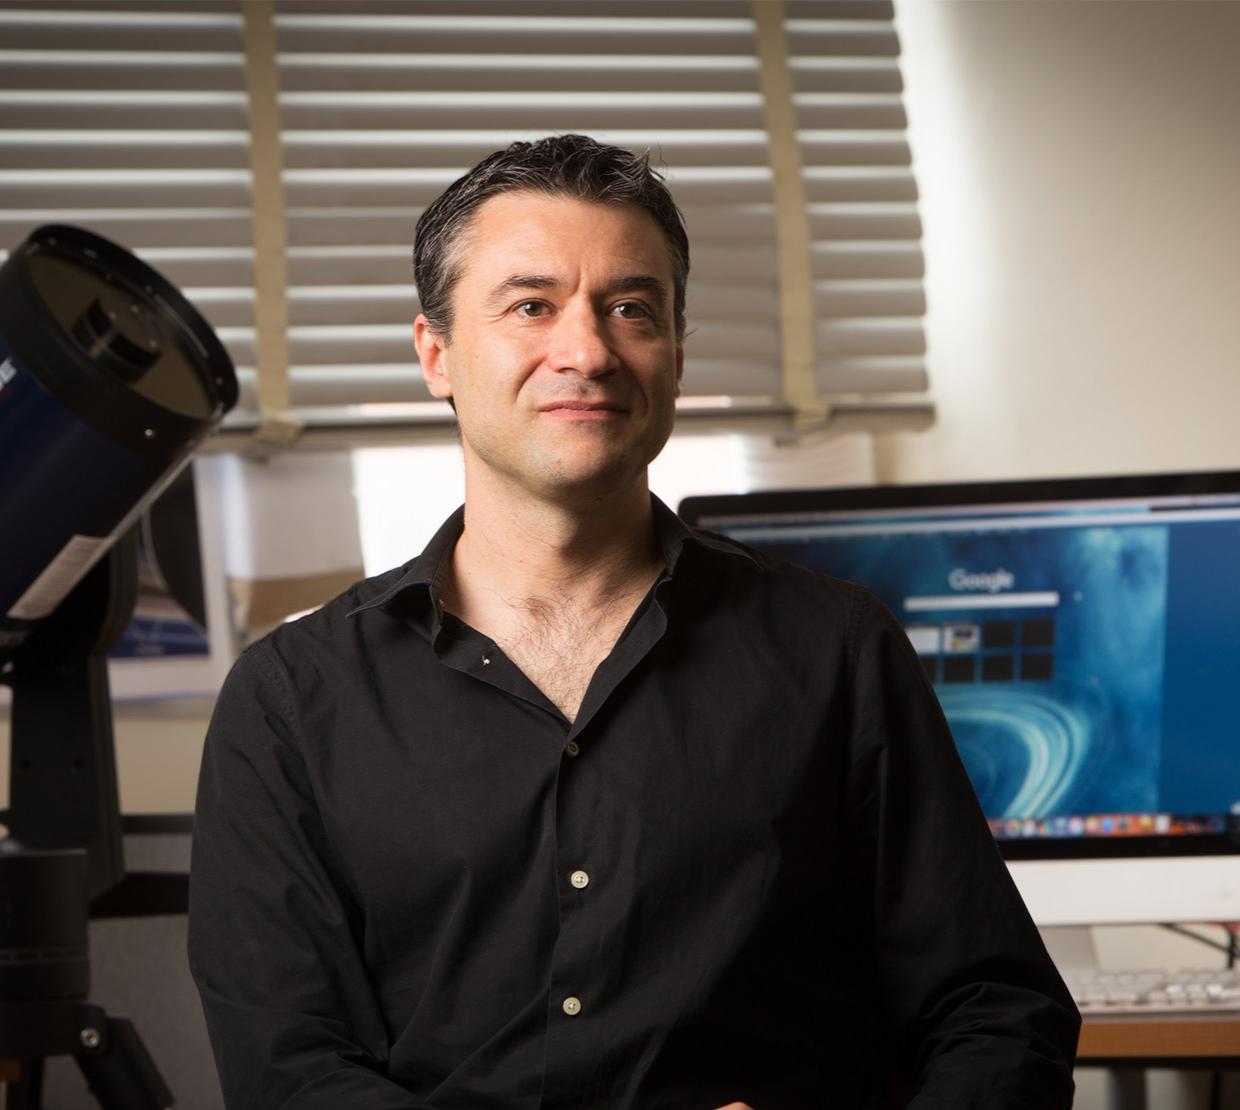 Department of Physics head Davide Lazatti sits in a well-lit office space.